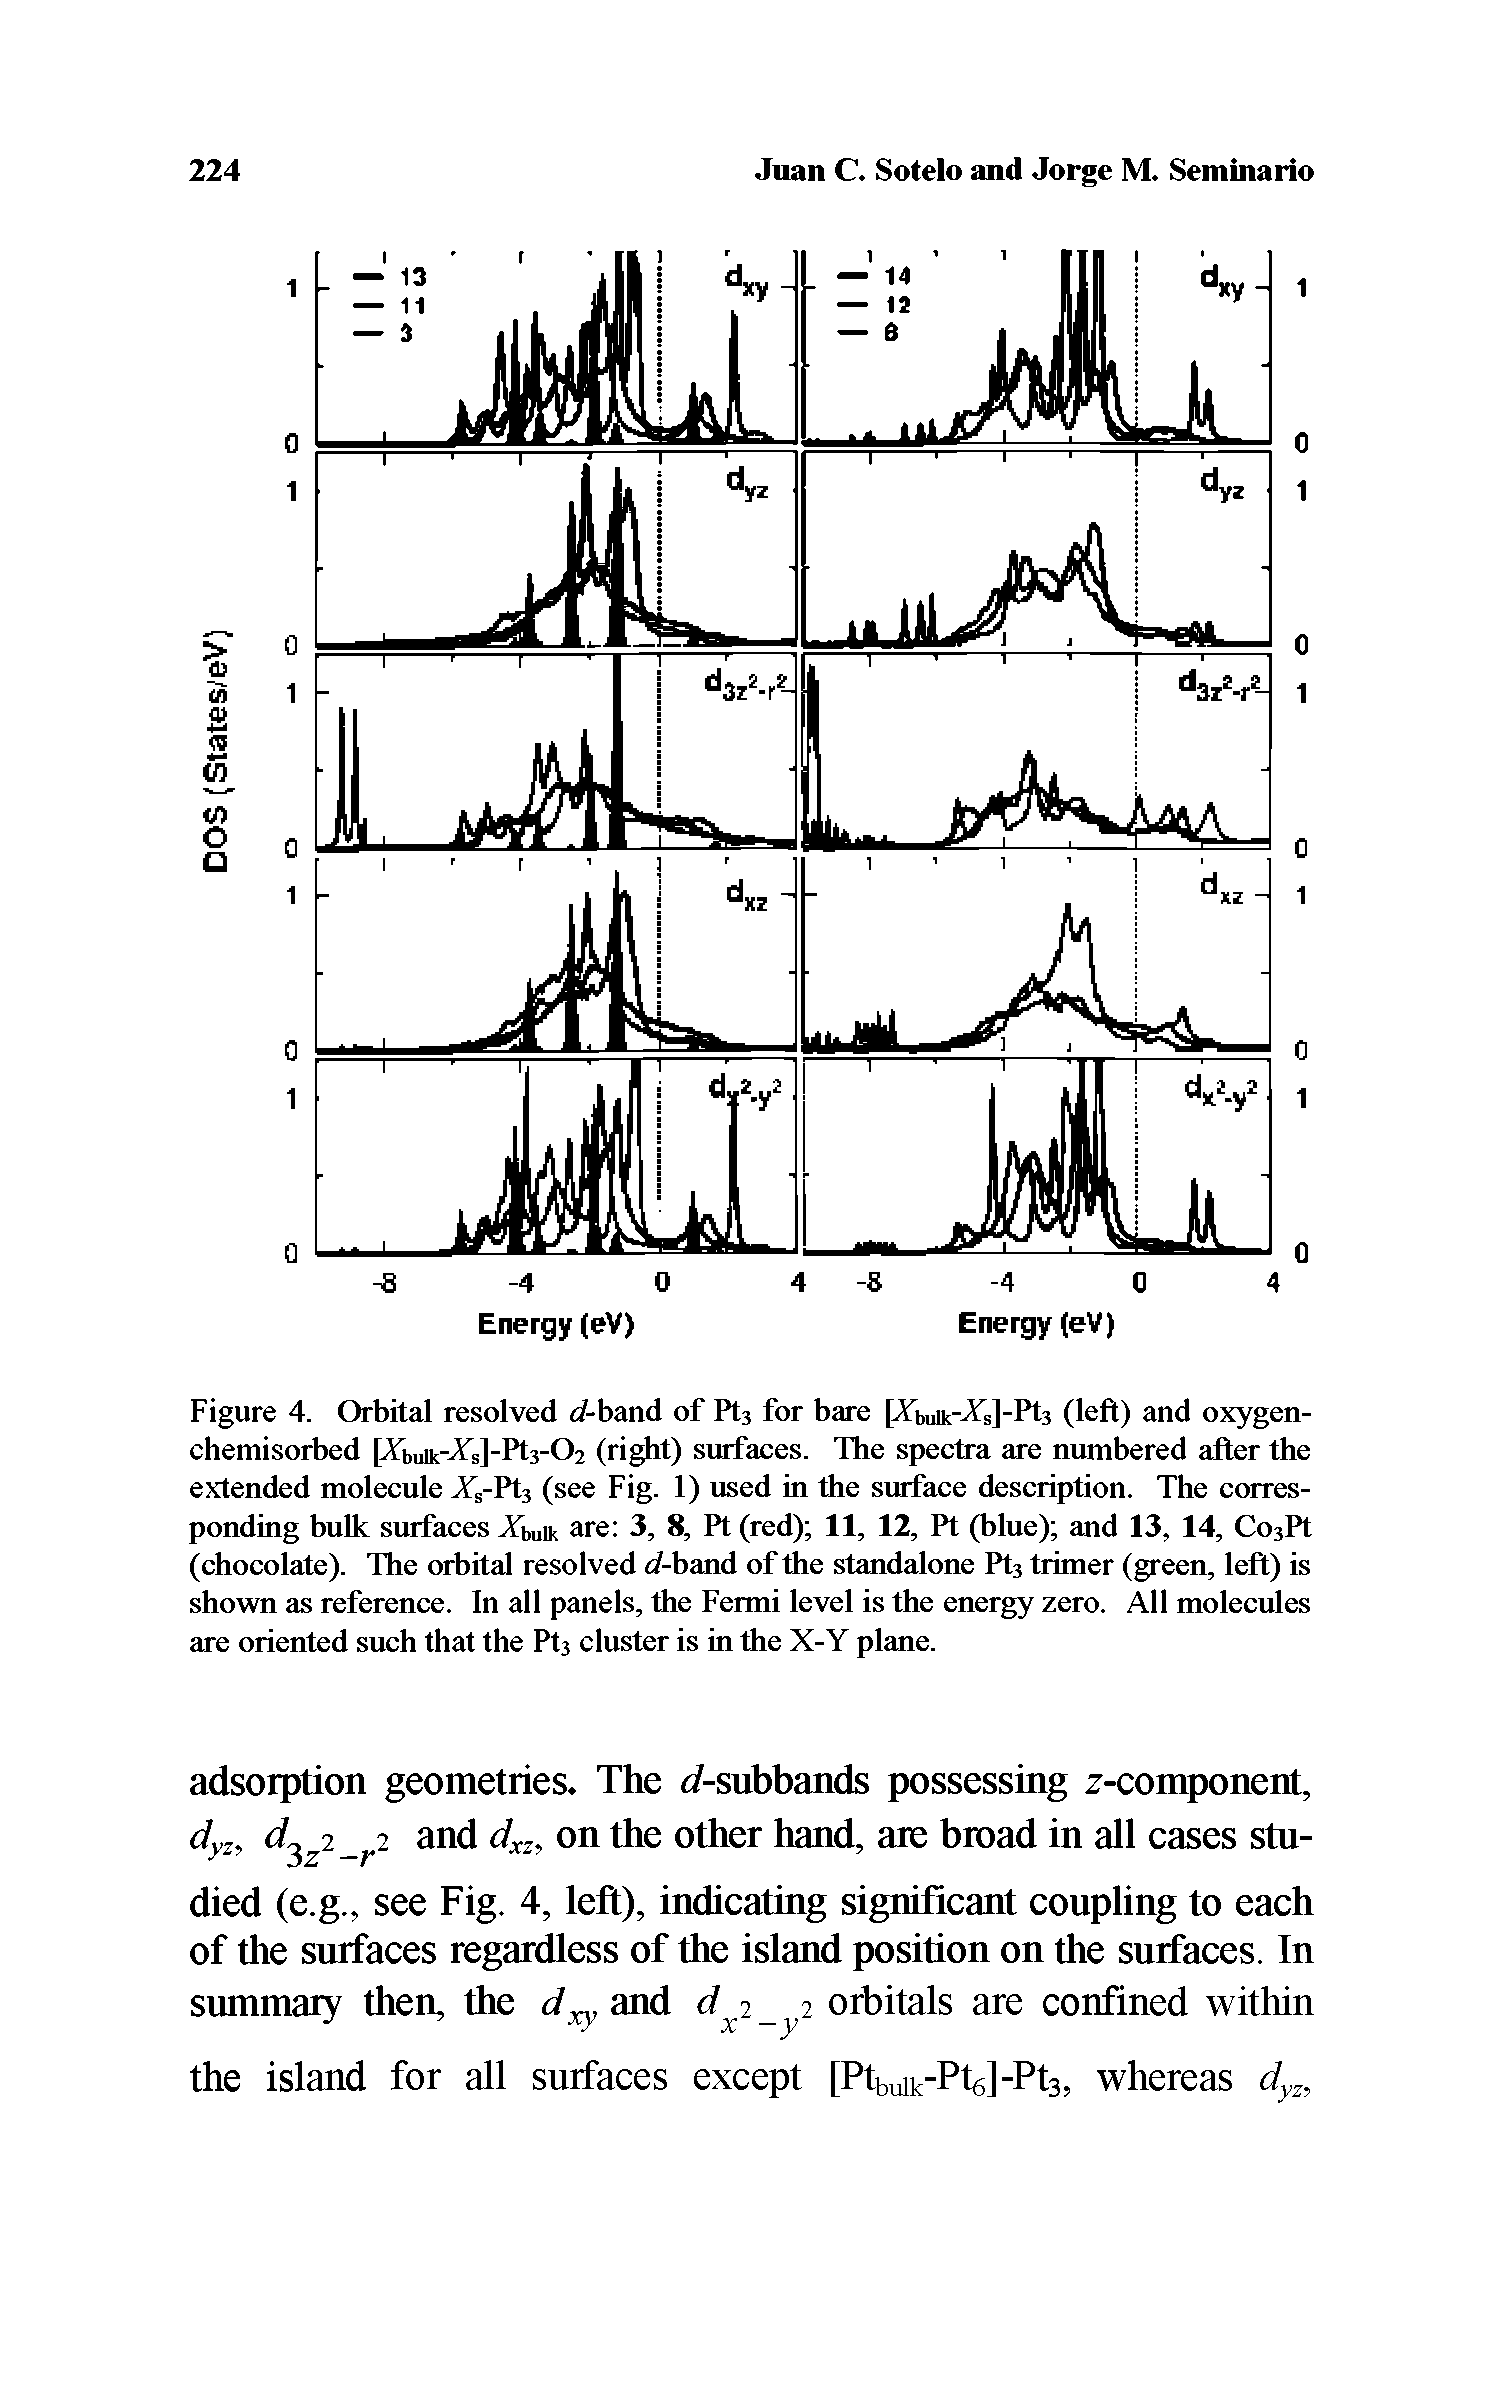 Figure 4. Orbital resolved rf-band of Pts for bare [Xbuik- s]-Pt3 (left) and oxygen-chemisorbed [Xbuik- s]-Pt3-02 (right) surfaces. The spectra are numbered after the extended molecule Xs-Pt3 (see Fig. 1) used in the surface description. The corresponding bulk surfaces Xbun are 3, 8, Pt (red) 11, 12, Pt (blue) and 13, 14, Co3Pt (chocolate). The orbital resolved rf-band of the standalone Pt3 trimer (green, left) is shown as reference. In all panels, the Fermi level is the energy zero. All molecules are oriented such that the Pts cluster is in the X-Y plane.